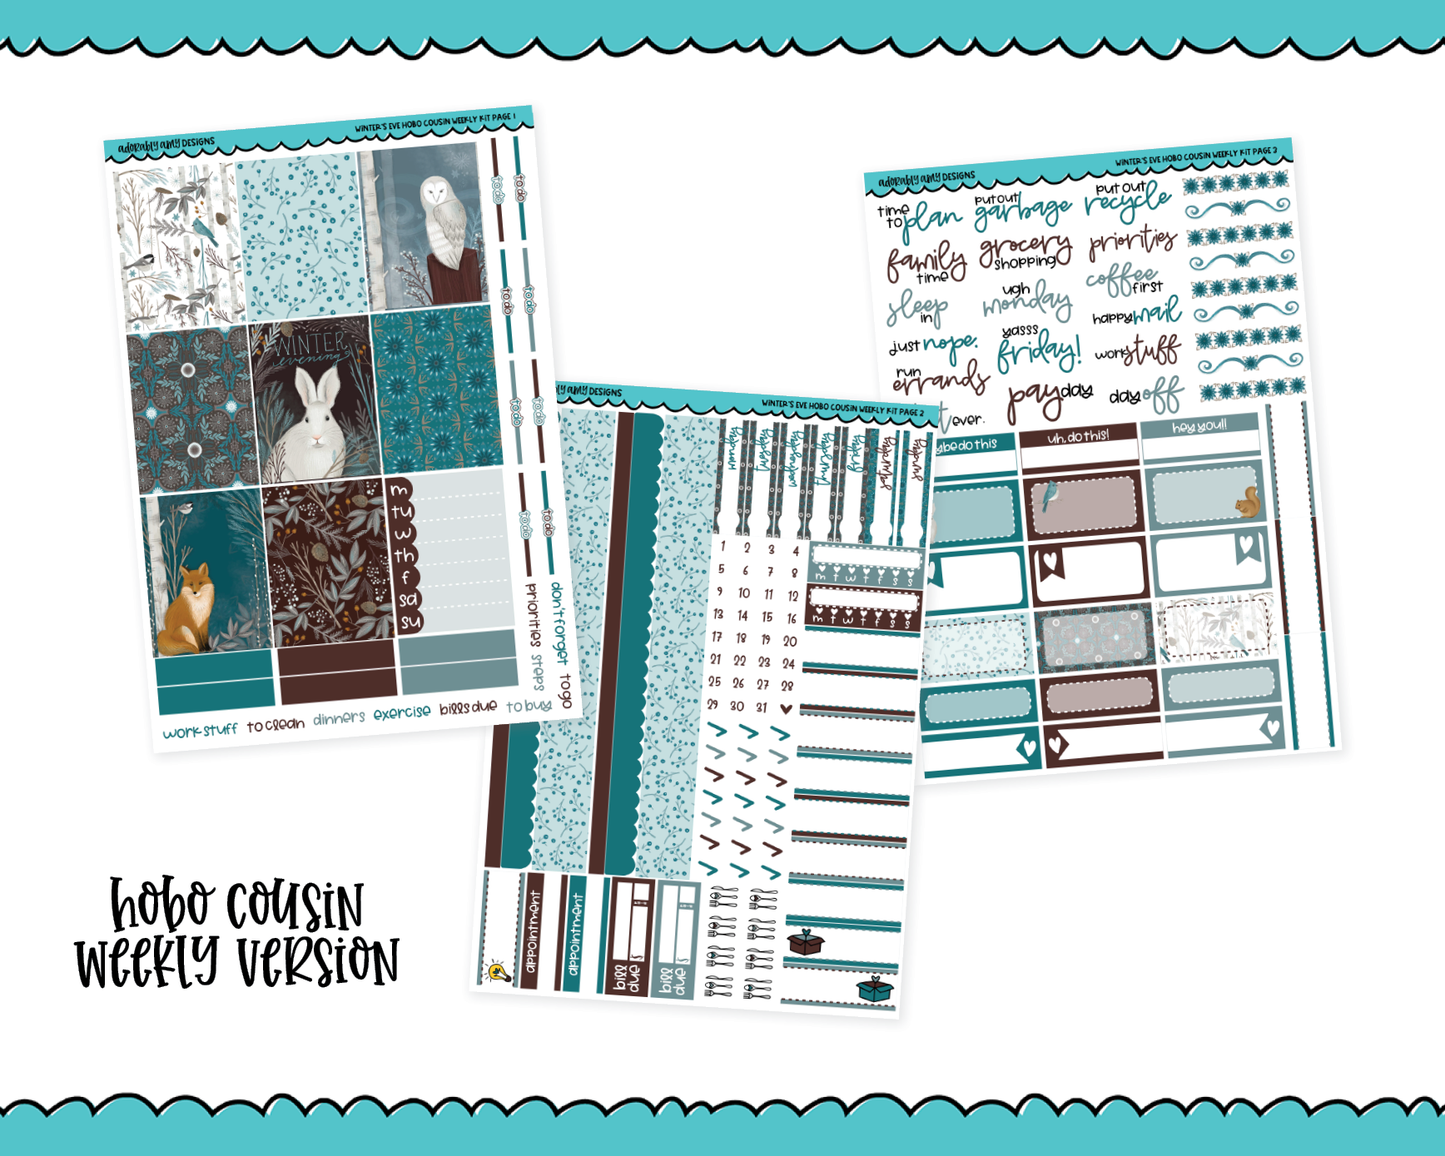 Hobonichi Cousin Weekly Winter's Eve Animal Winter Themed Planner Sticker Kit for Hobo Cousin or Similar Planners